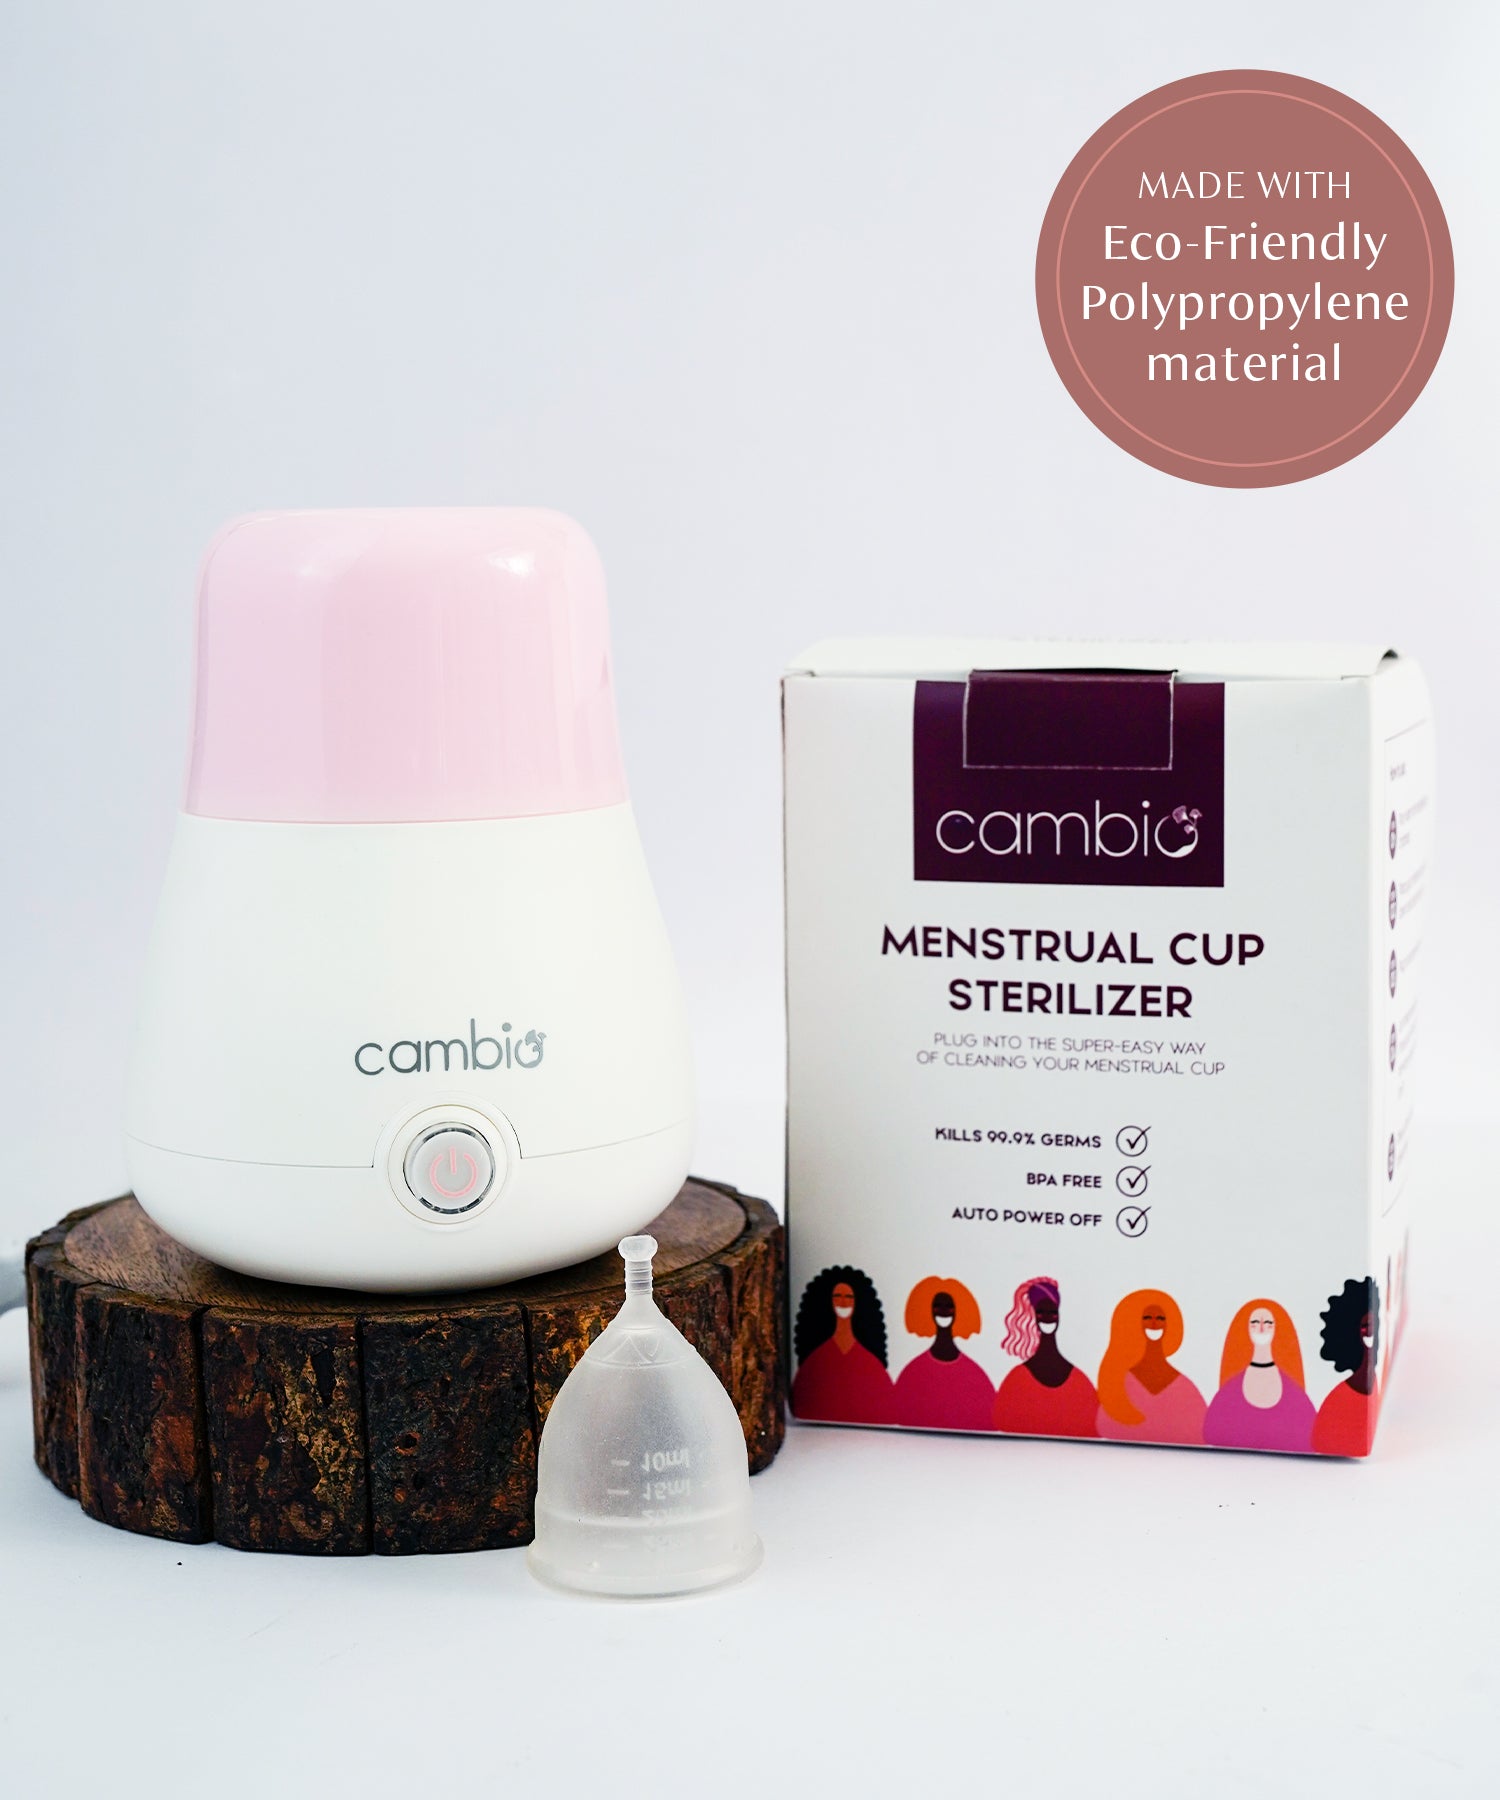 Menstrual Cup Sterilizer for Healthy and Convenient Period